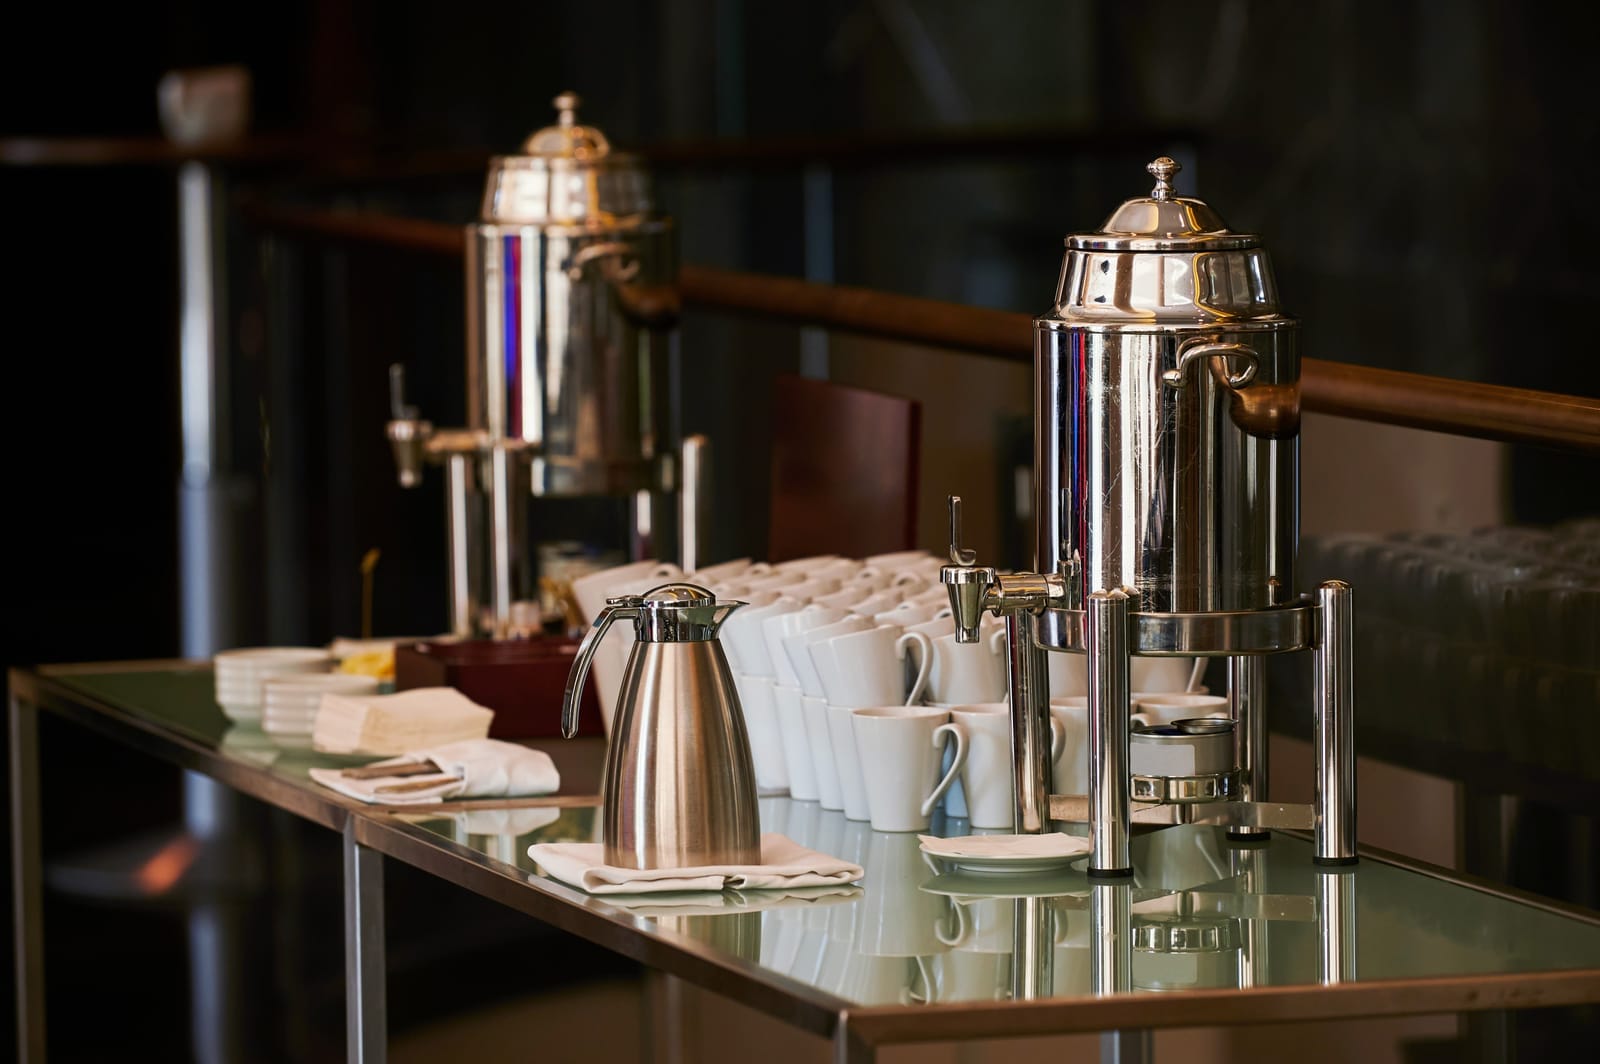 Catering coffee equipment with mugs and creamer for an event.